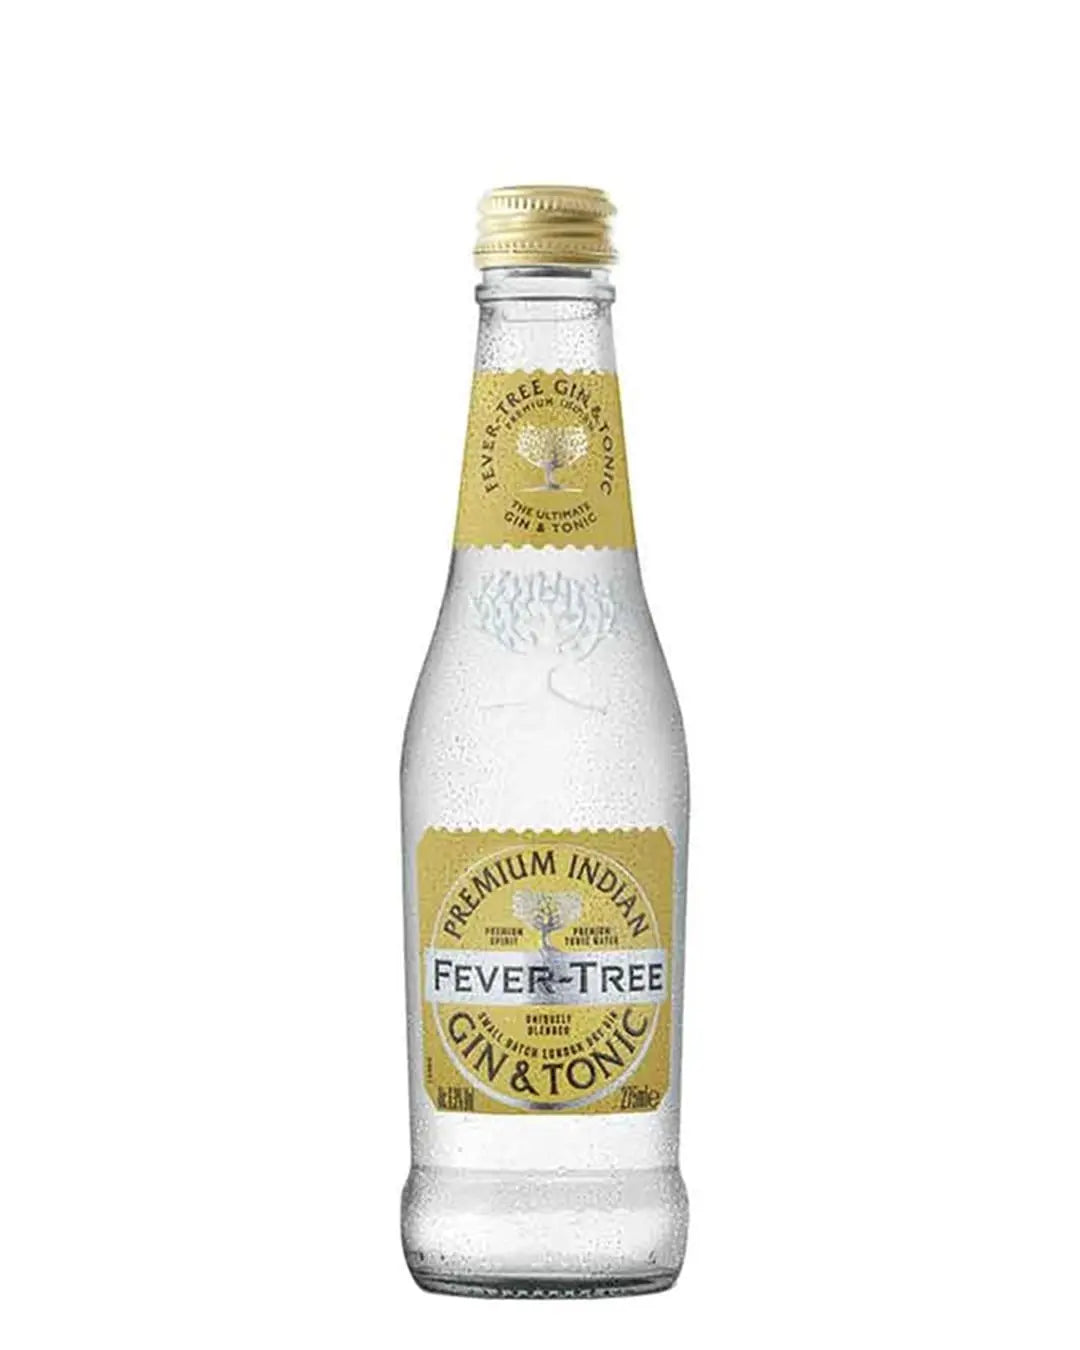 Fever-Tree Premium Indian Gin & Tonic, 275 ml Ready Made Cocktails 5060605060316